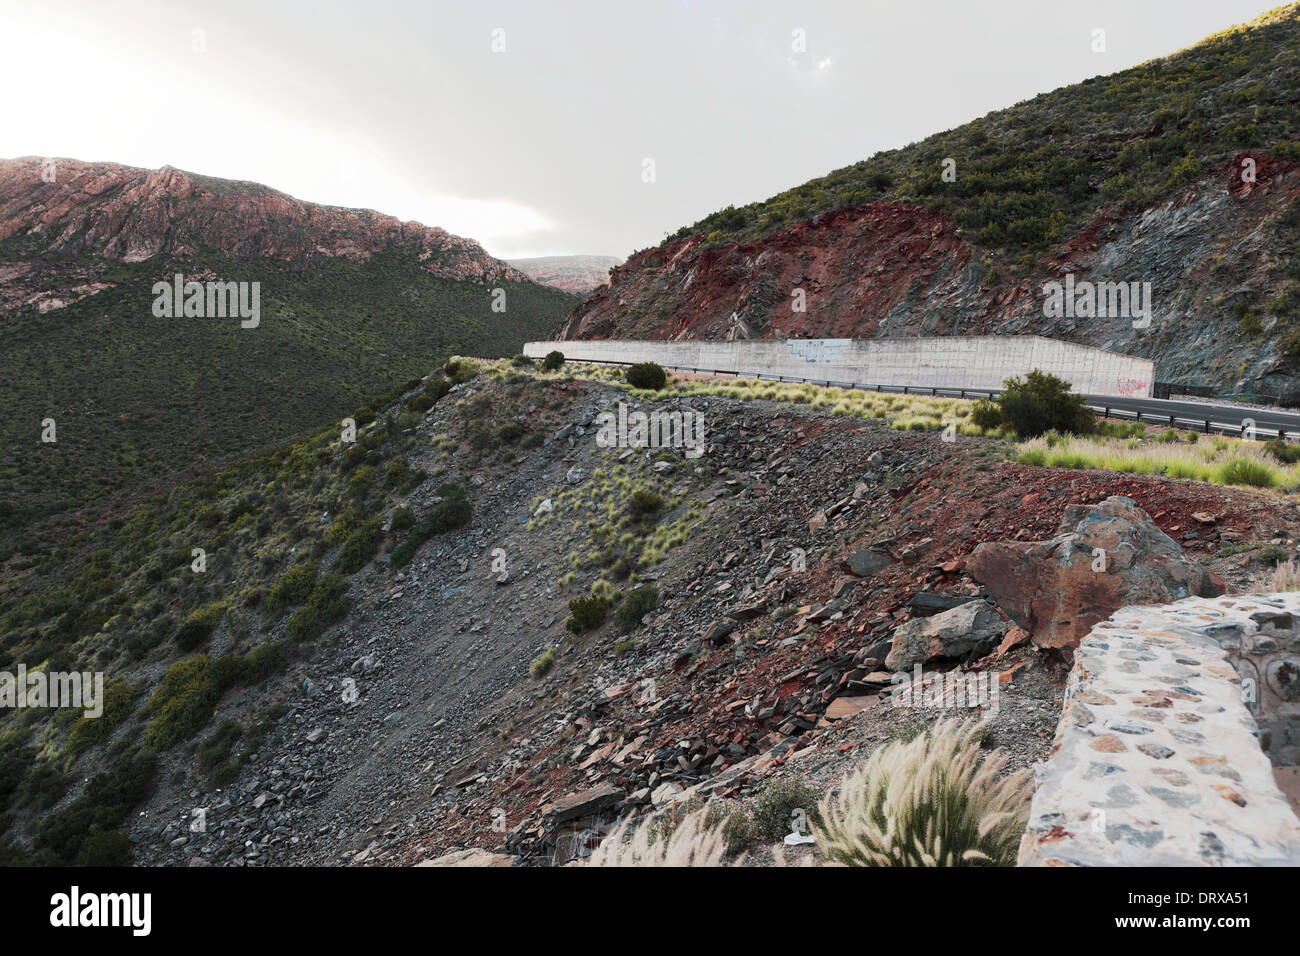 R62 highway in the Huis River Pass close to Calitzdorp, South Africa Stock Photo